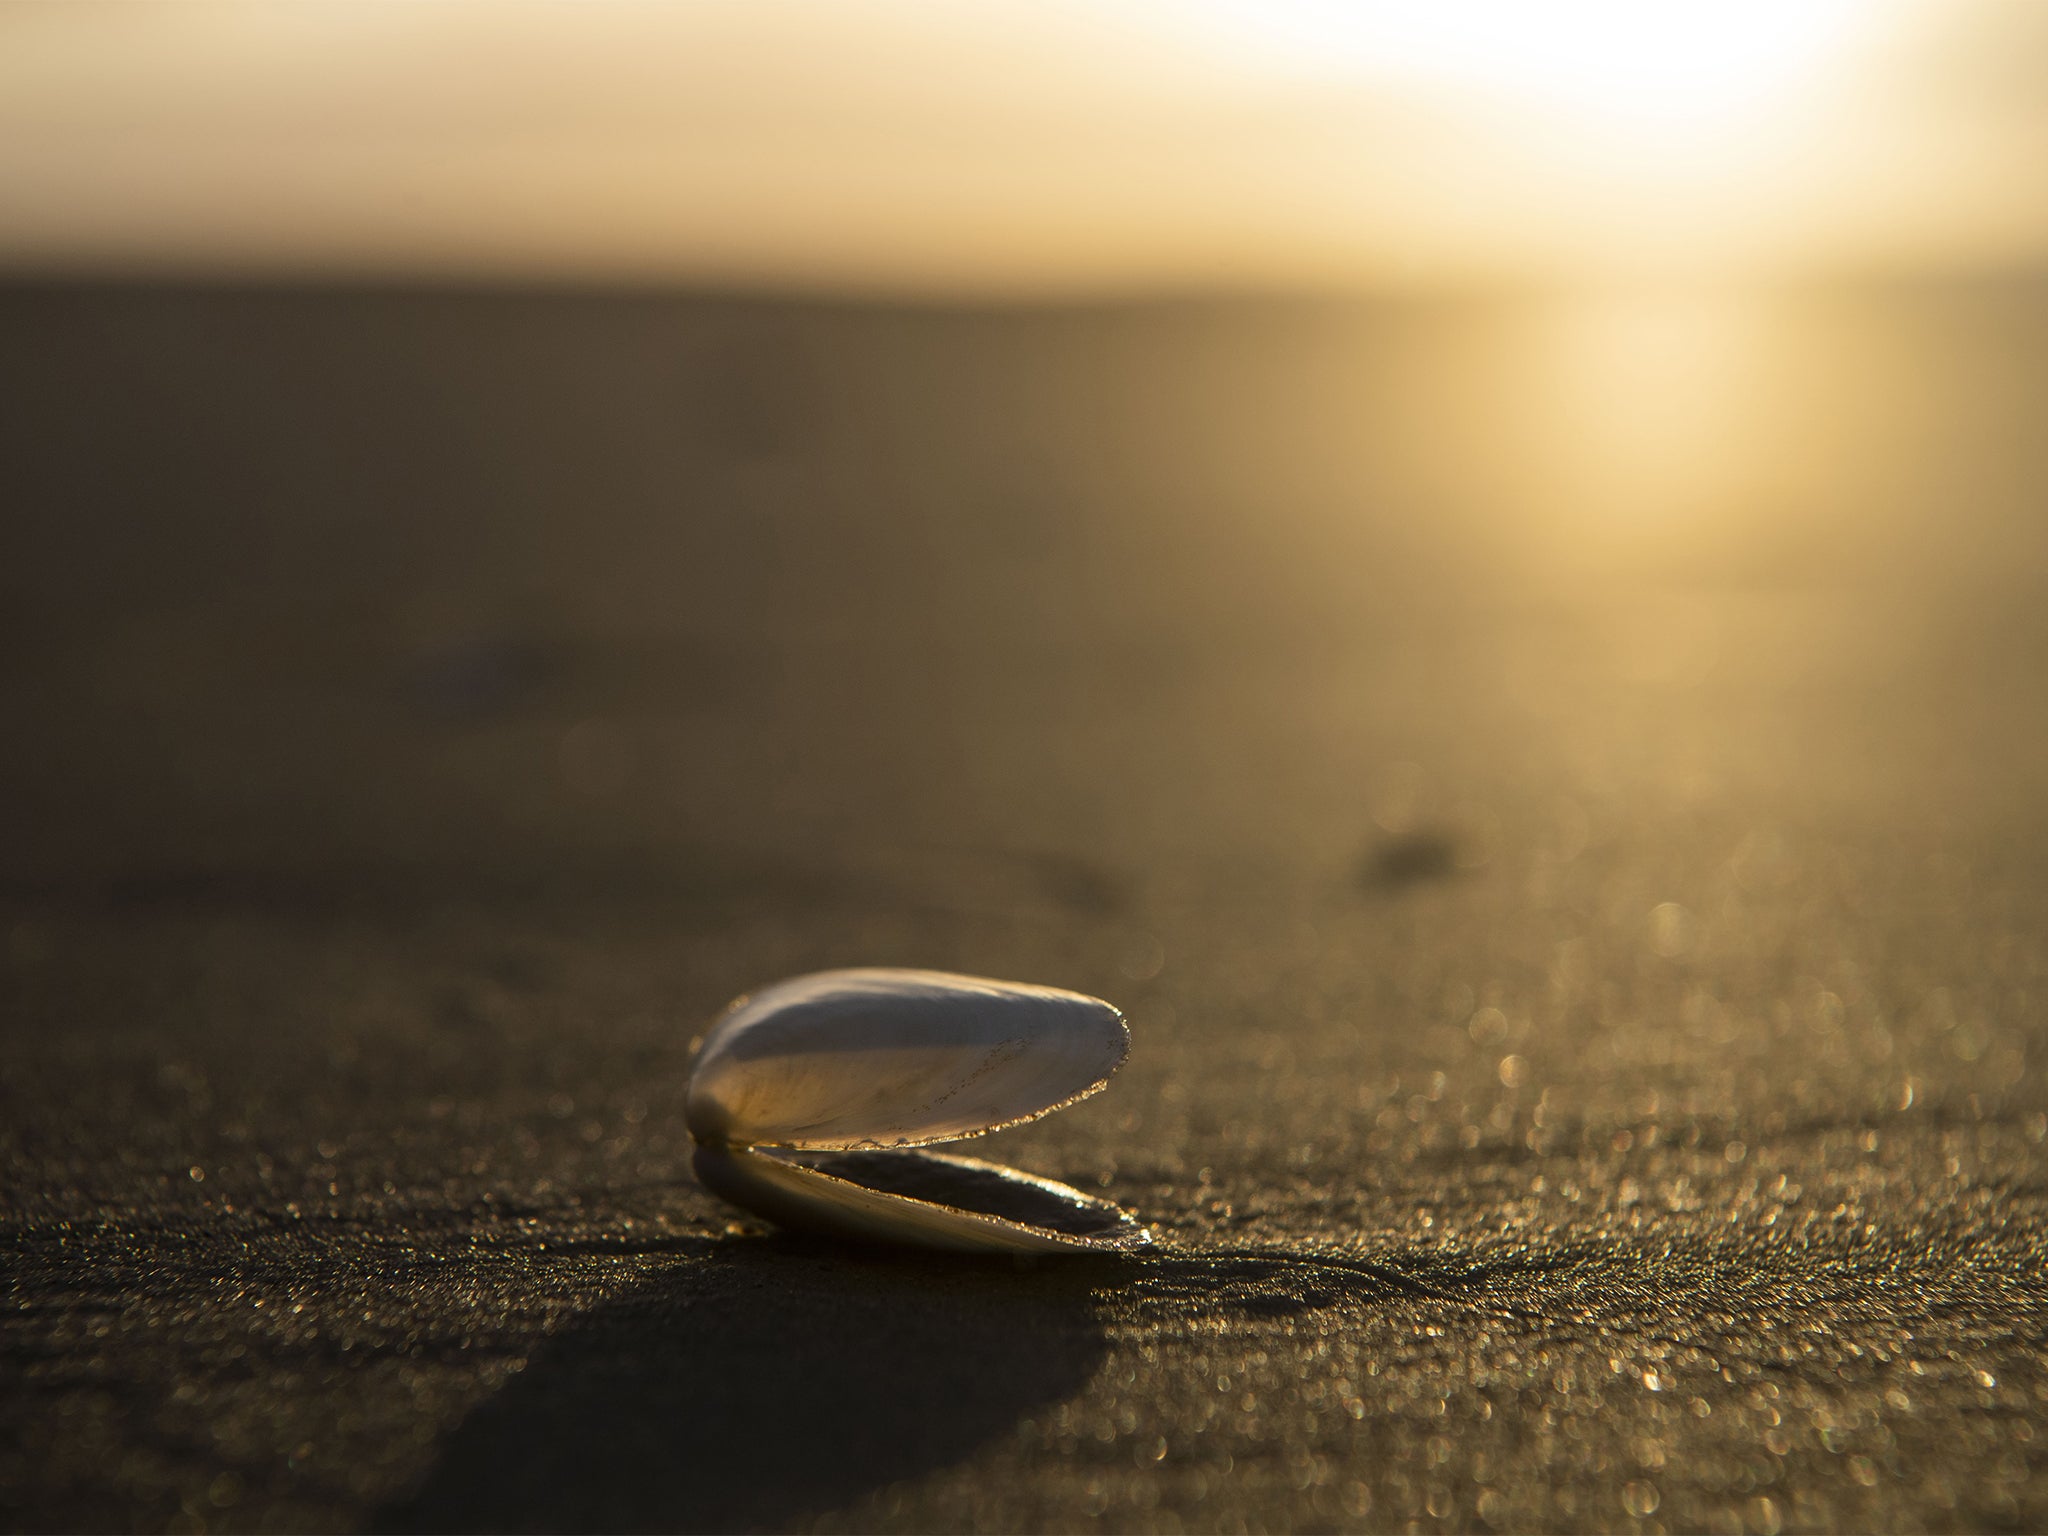 The sun rises behind an empty yellow clam shell sitting on the beach in Barra Del Chuy, Uruguay